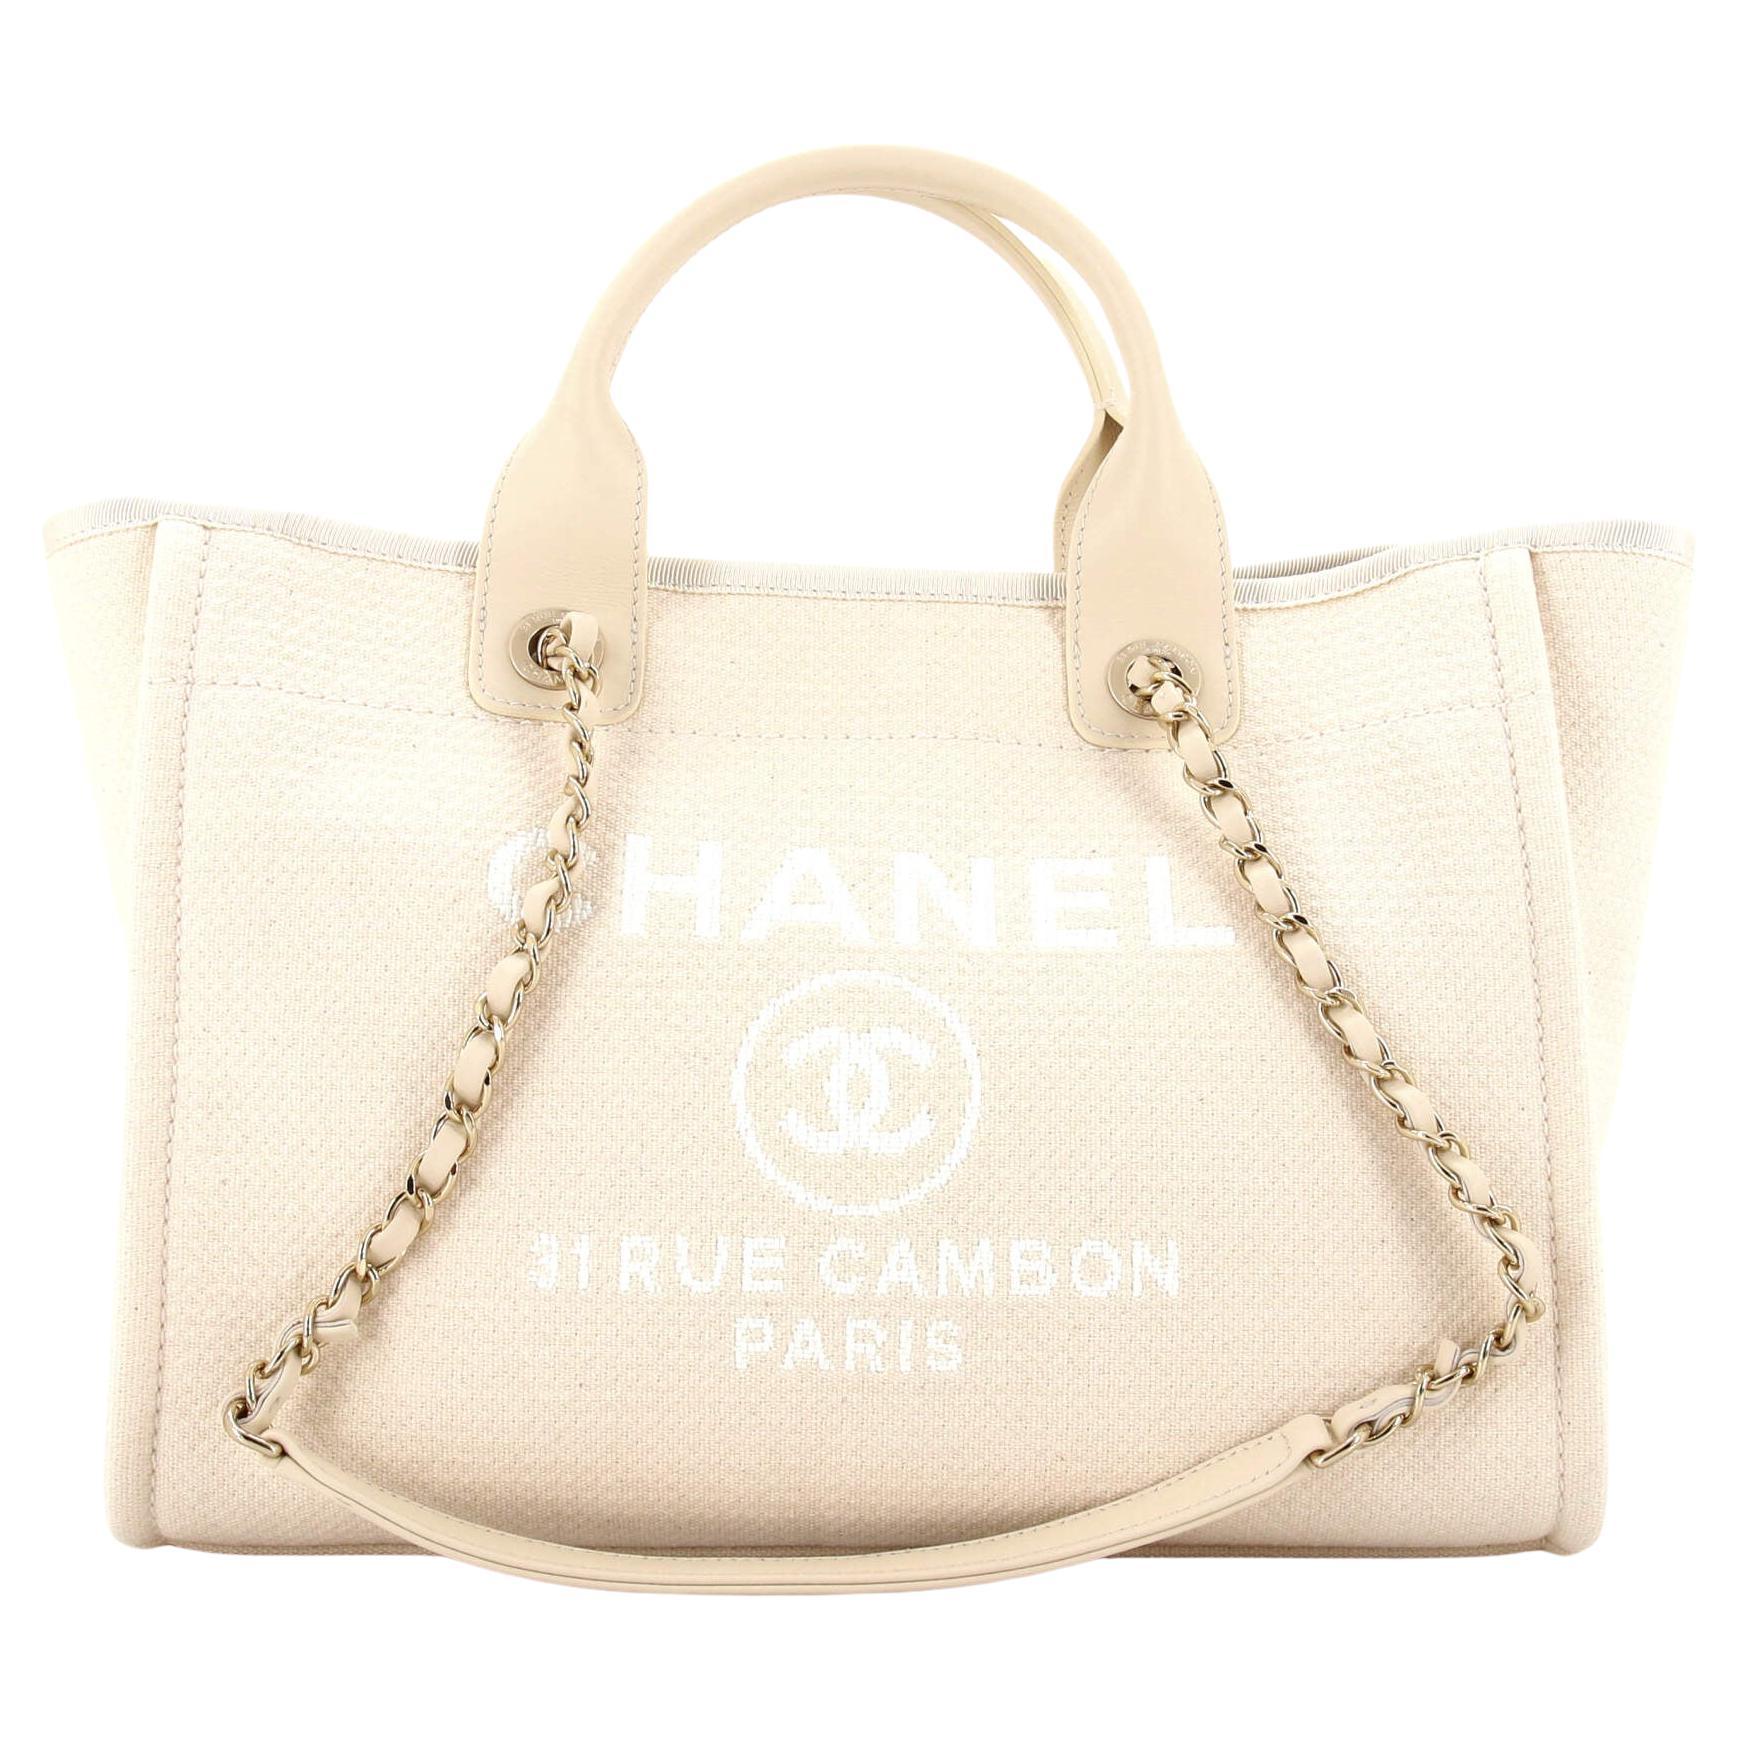 CHANEL, Bags, Chanel 22 Deauville Small Tote Mixed Fibers